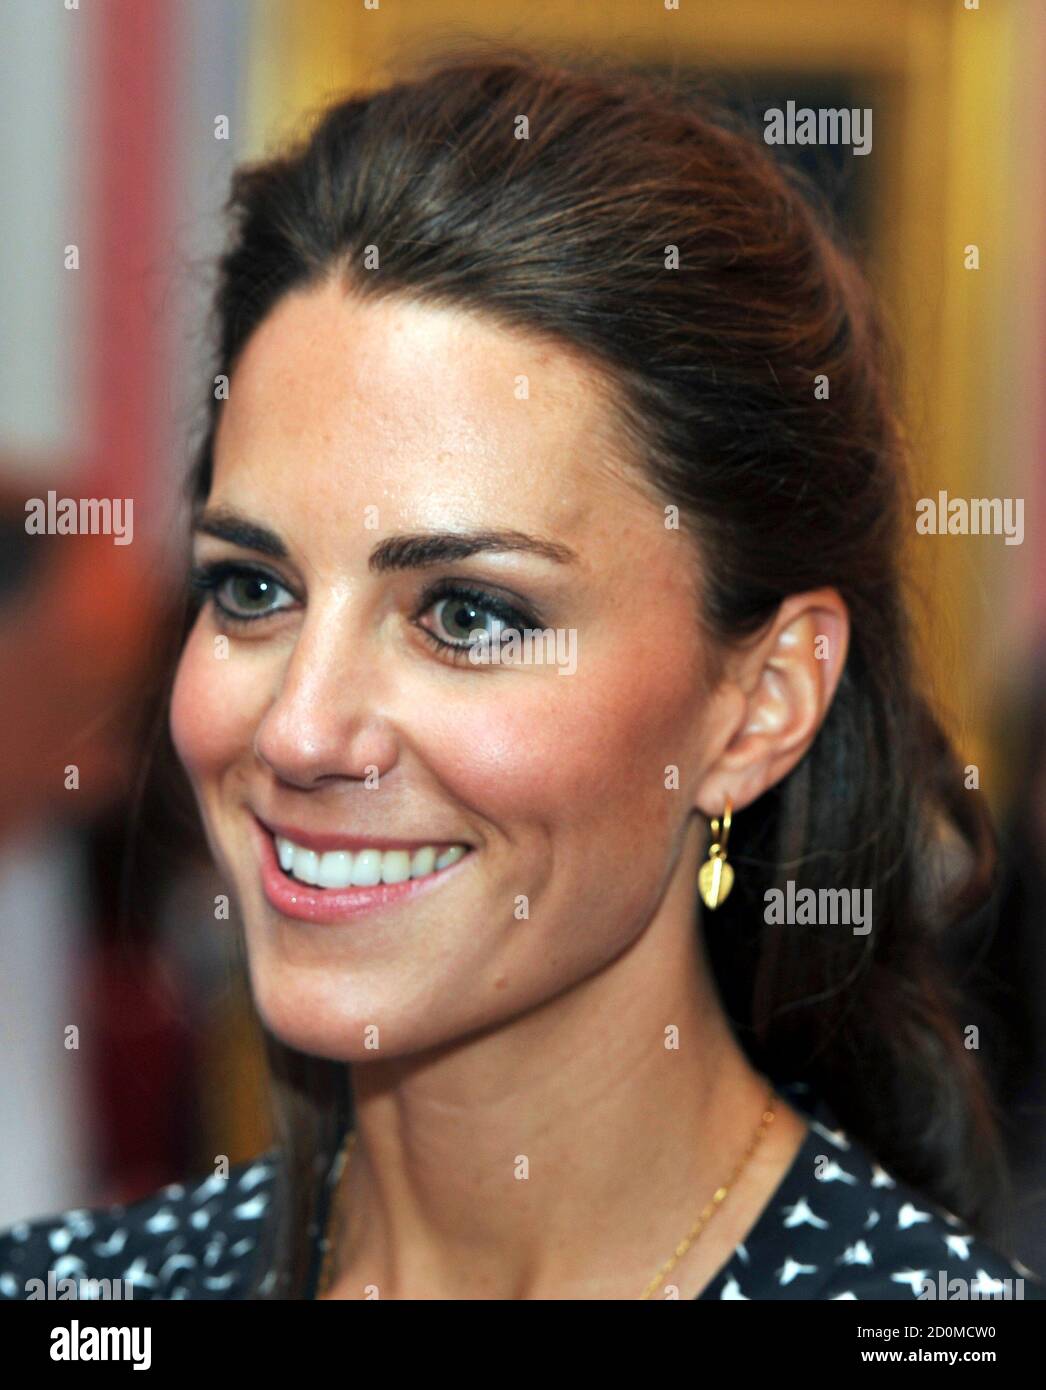 Britain S Catherine Duchess Of Cambridge Smiles During An Informal Reception For Young Canadian Volunteers At Rideau Hall The Official Residence Of The Governor General Of Canada In Ottawa June 30 11 The